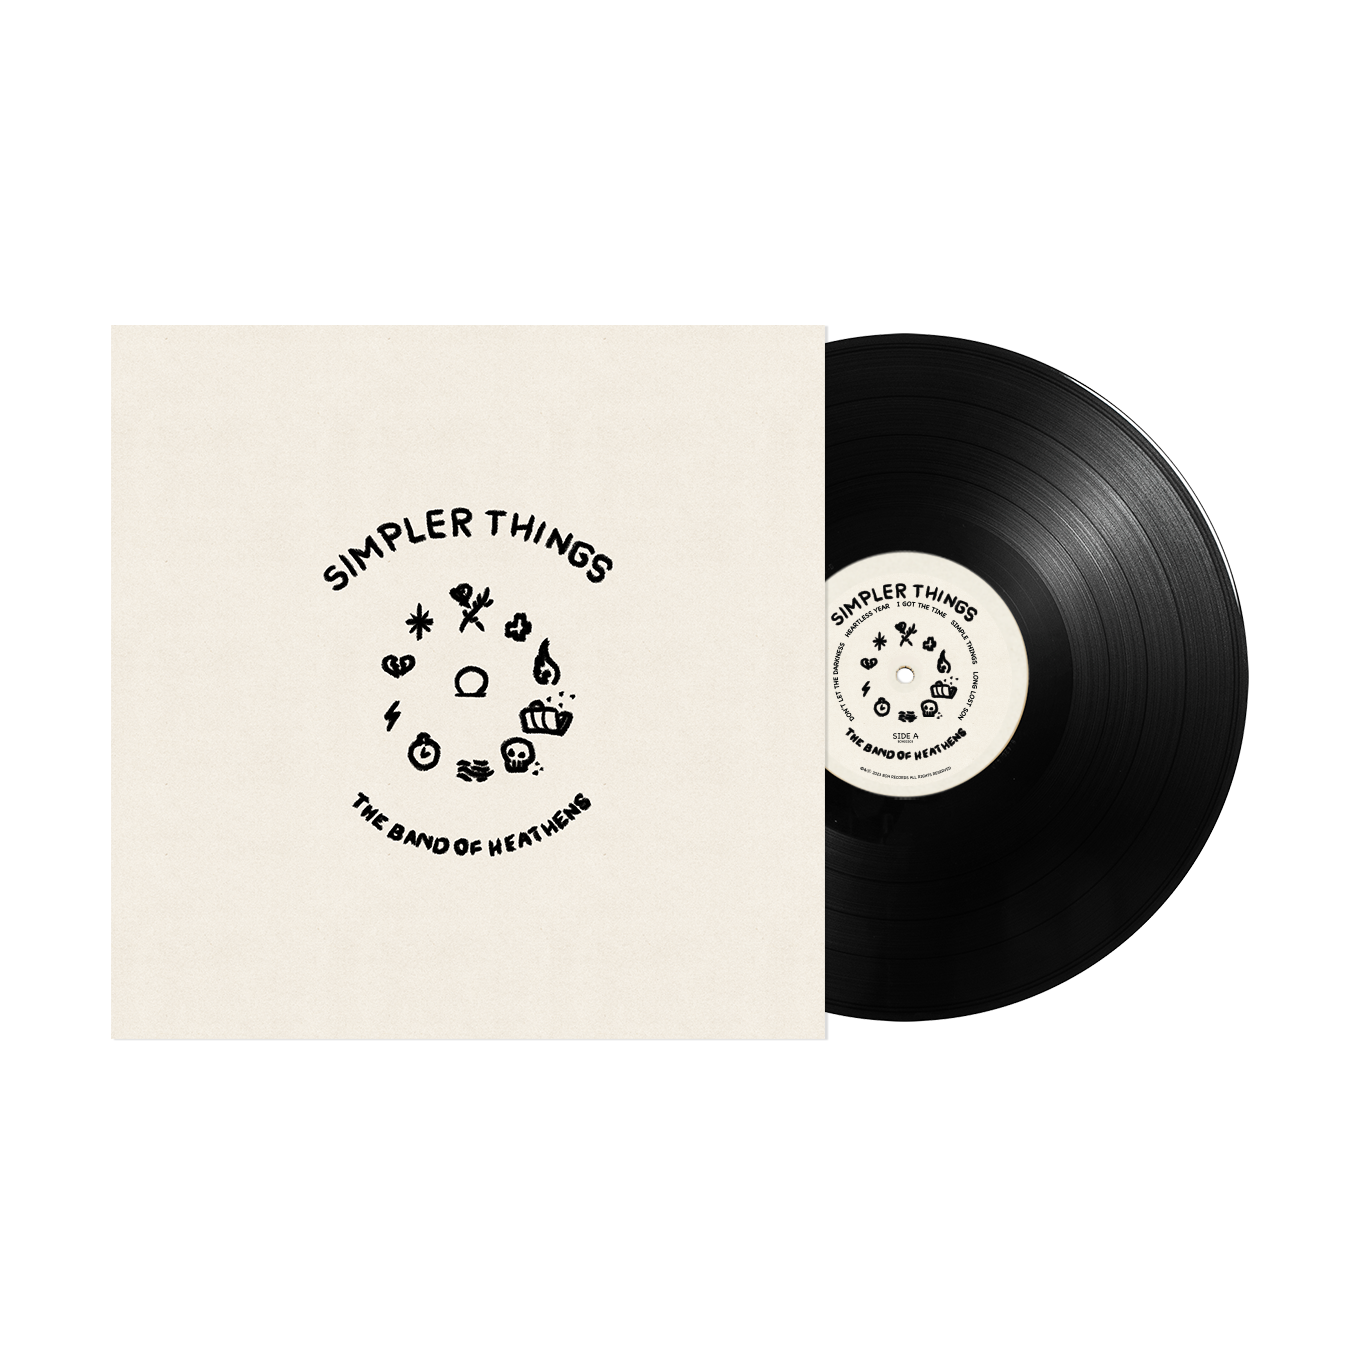 Simpler Things Vinyl (Limited Edition Release)